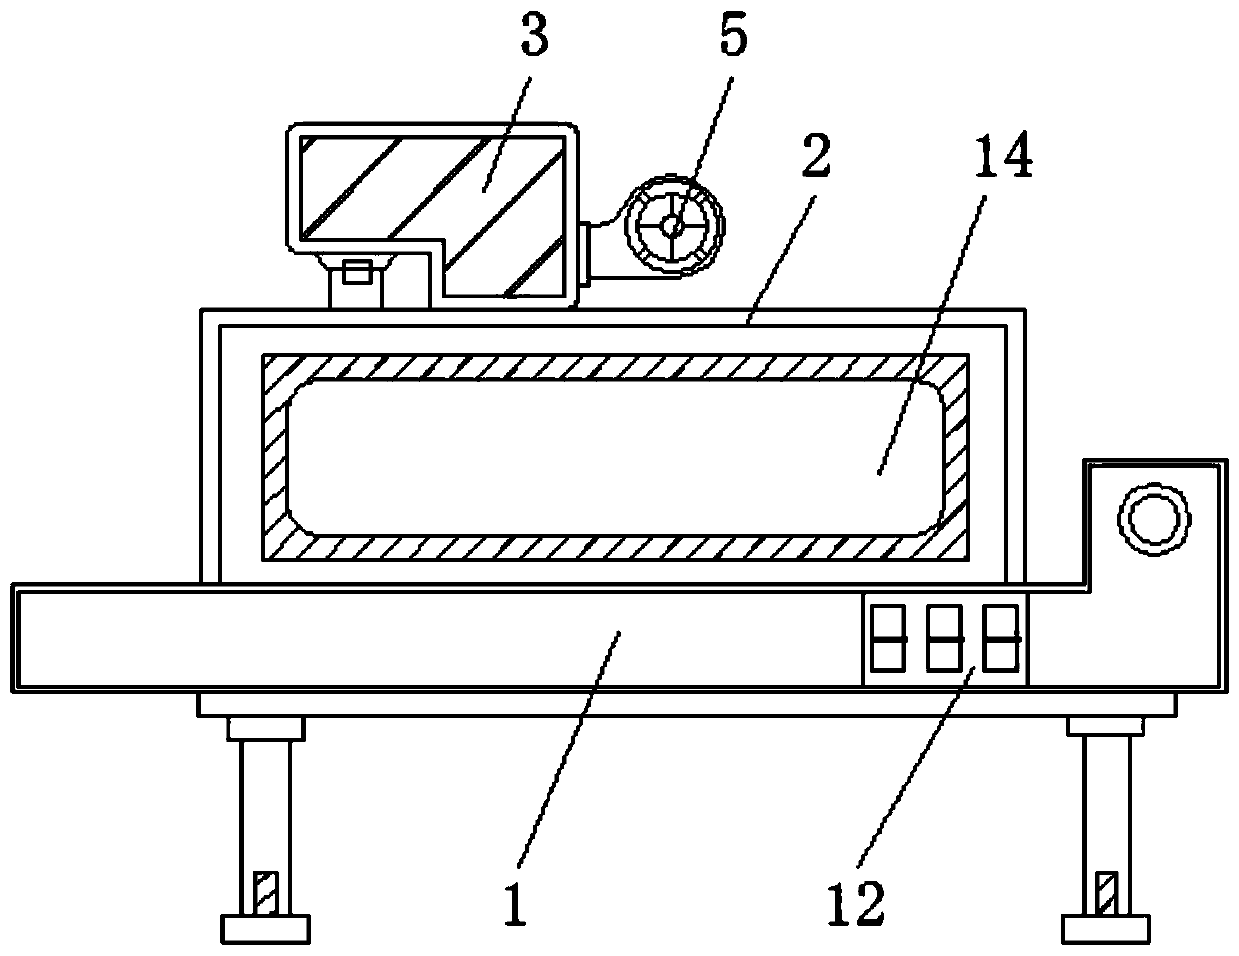 A textile oven with anti-wrinkle function